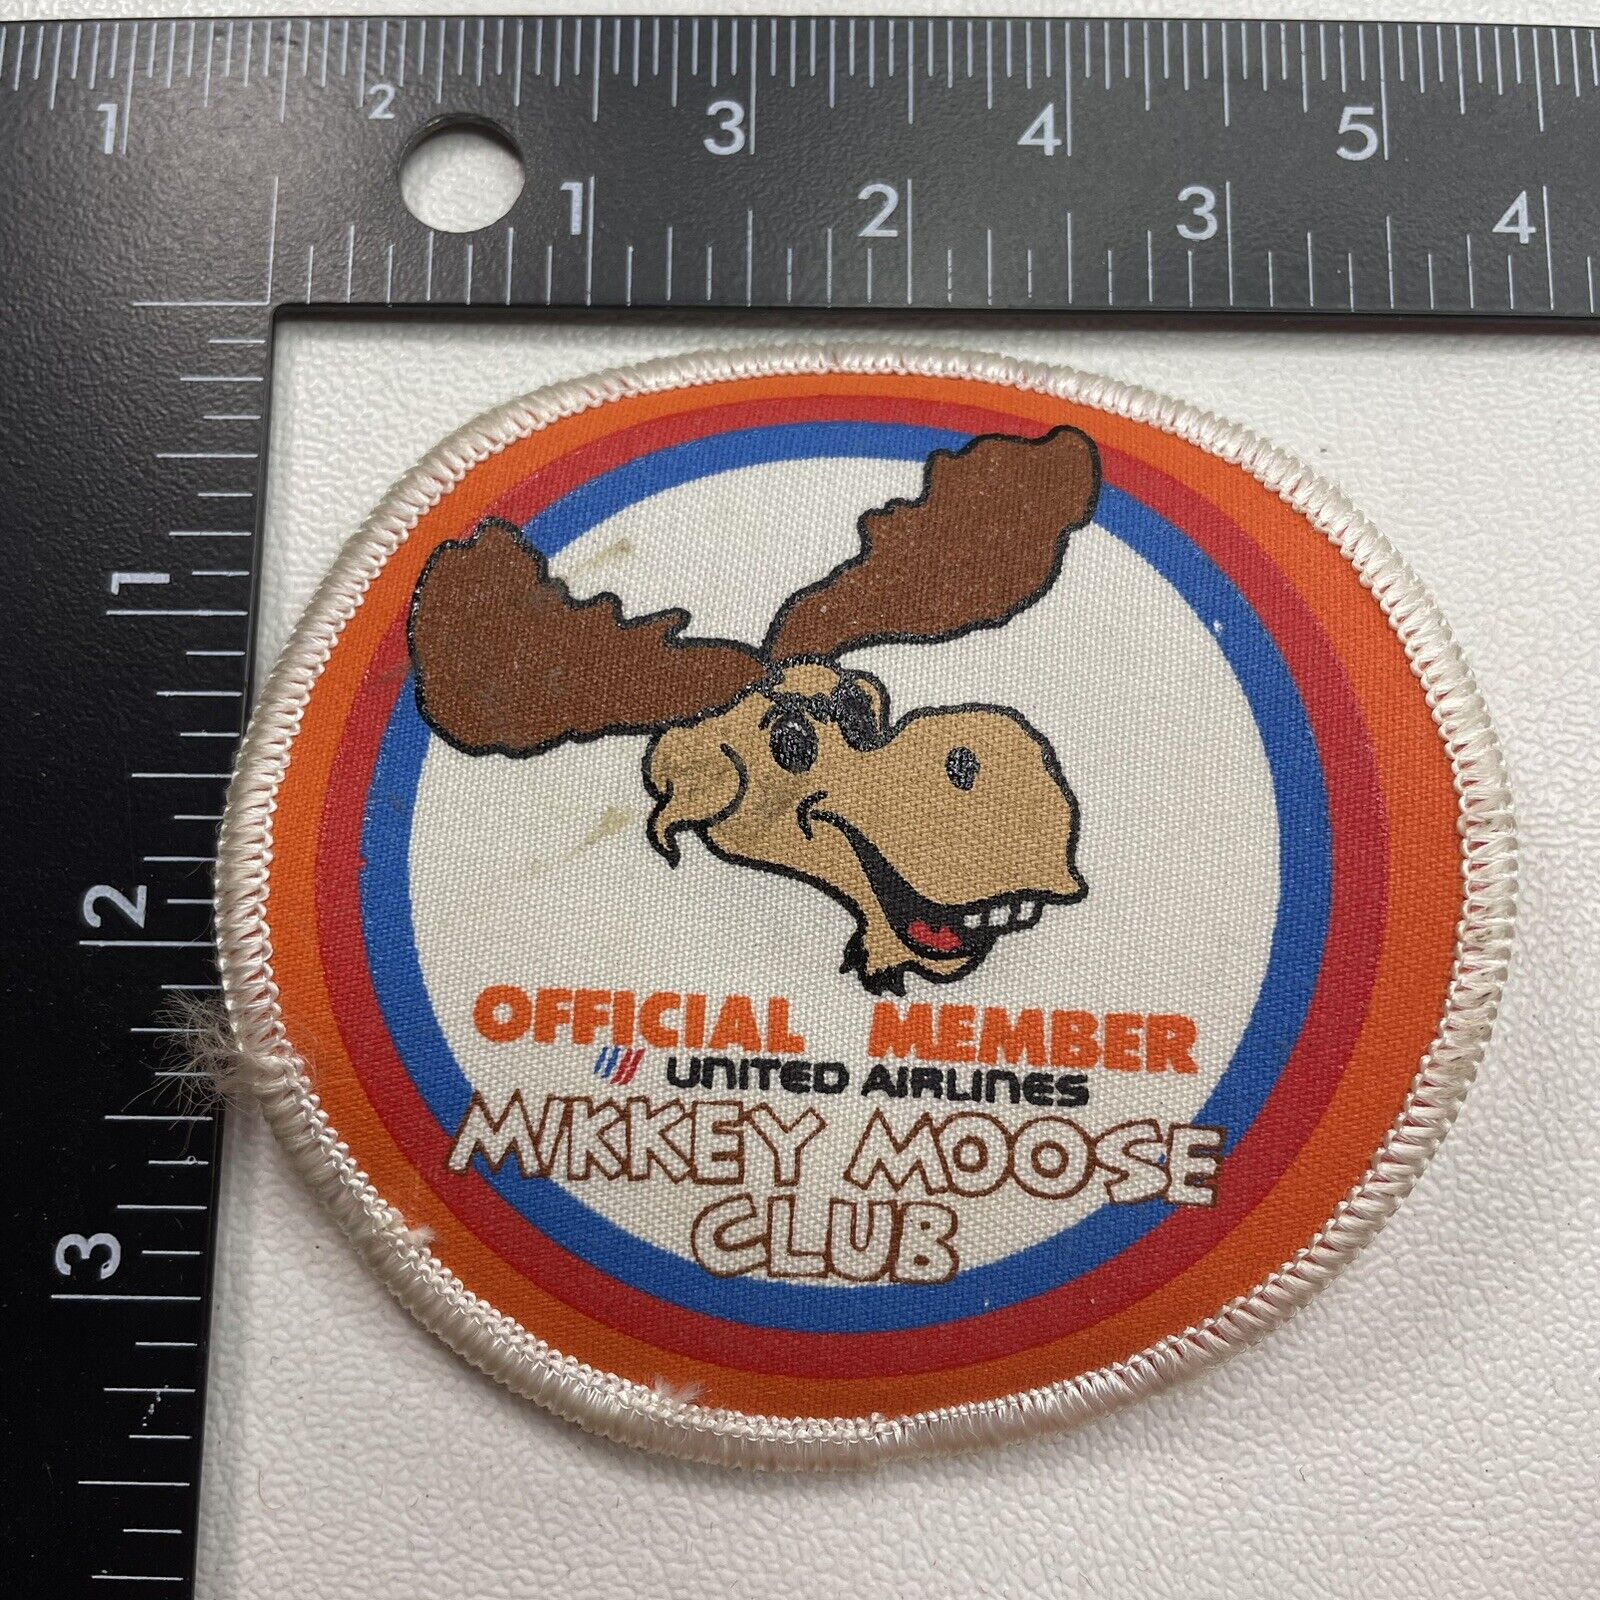 Vtg c 1980s Stain UNITED AIRLINES MIKKEY MOOSE CLUB MEMBER Airplane Patch 20U6